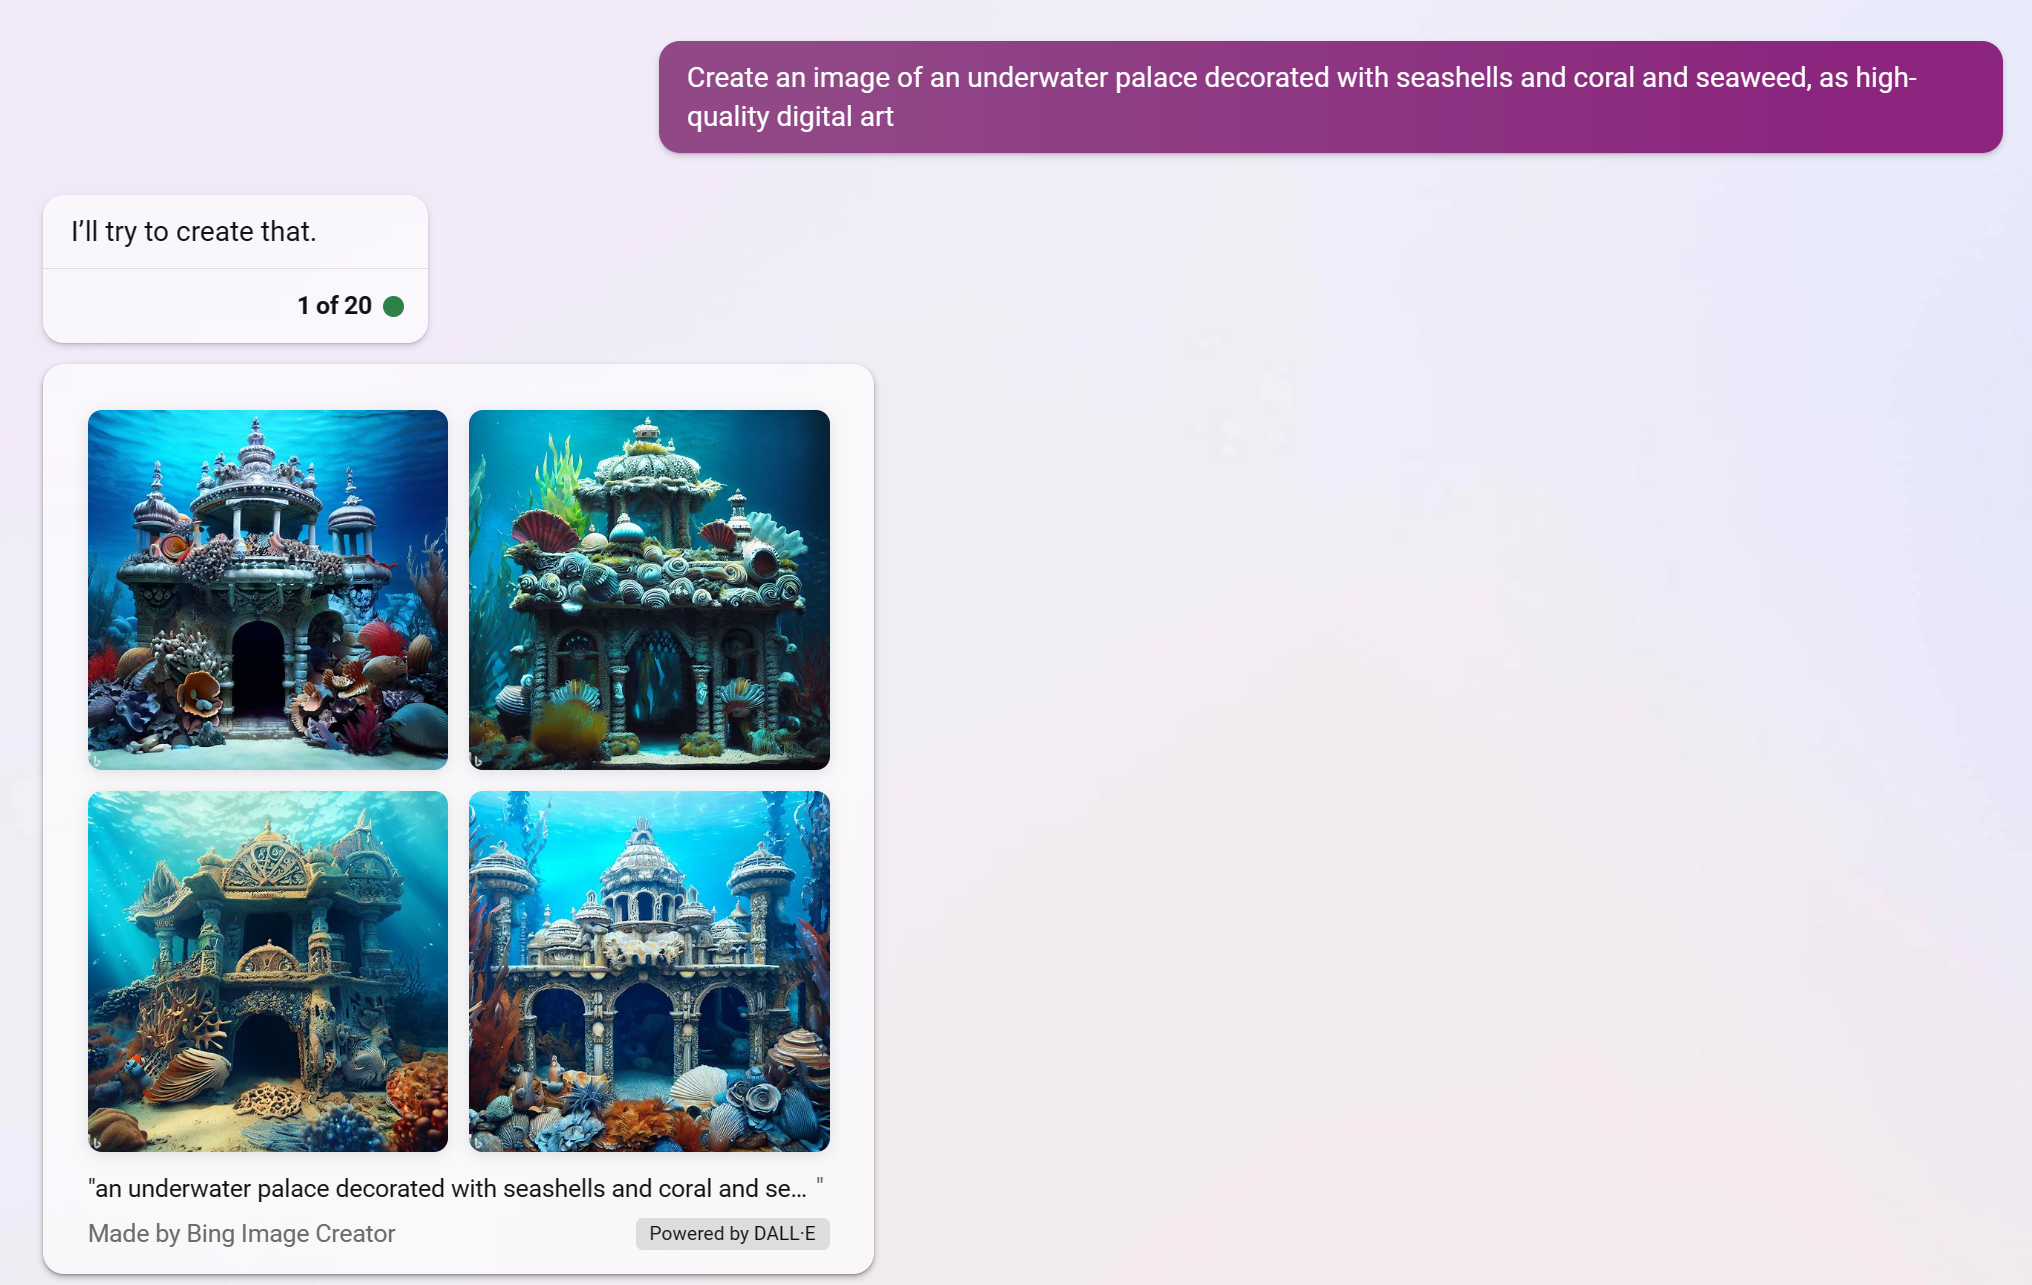 Bing Chat conversation showing images of an underwater palace.